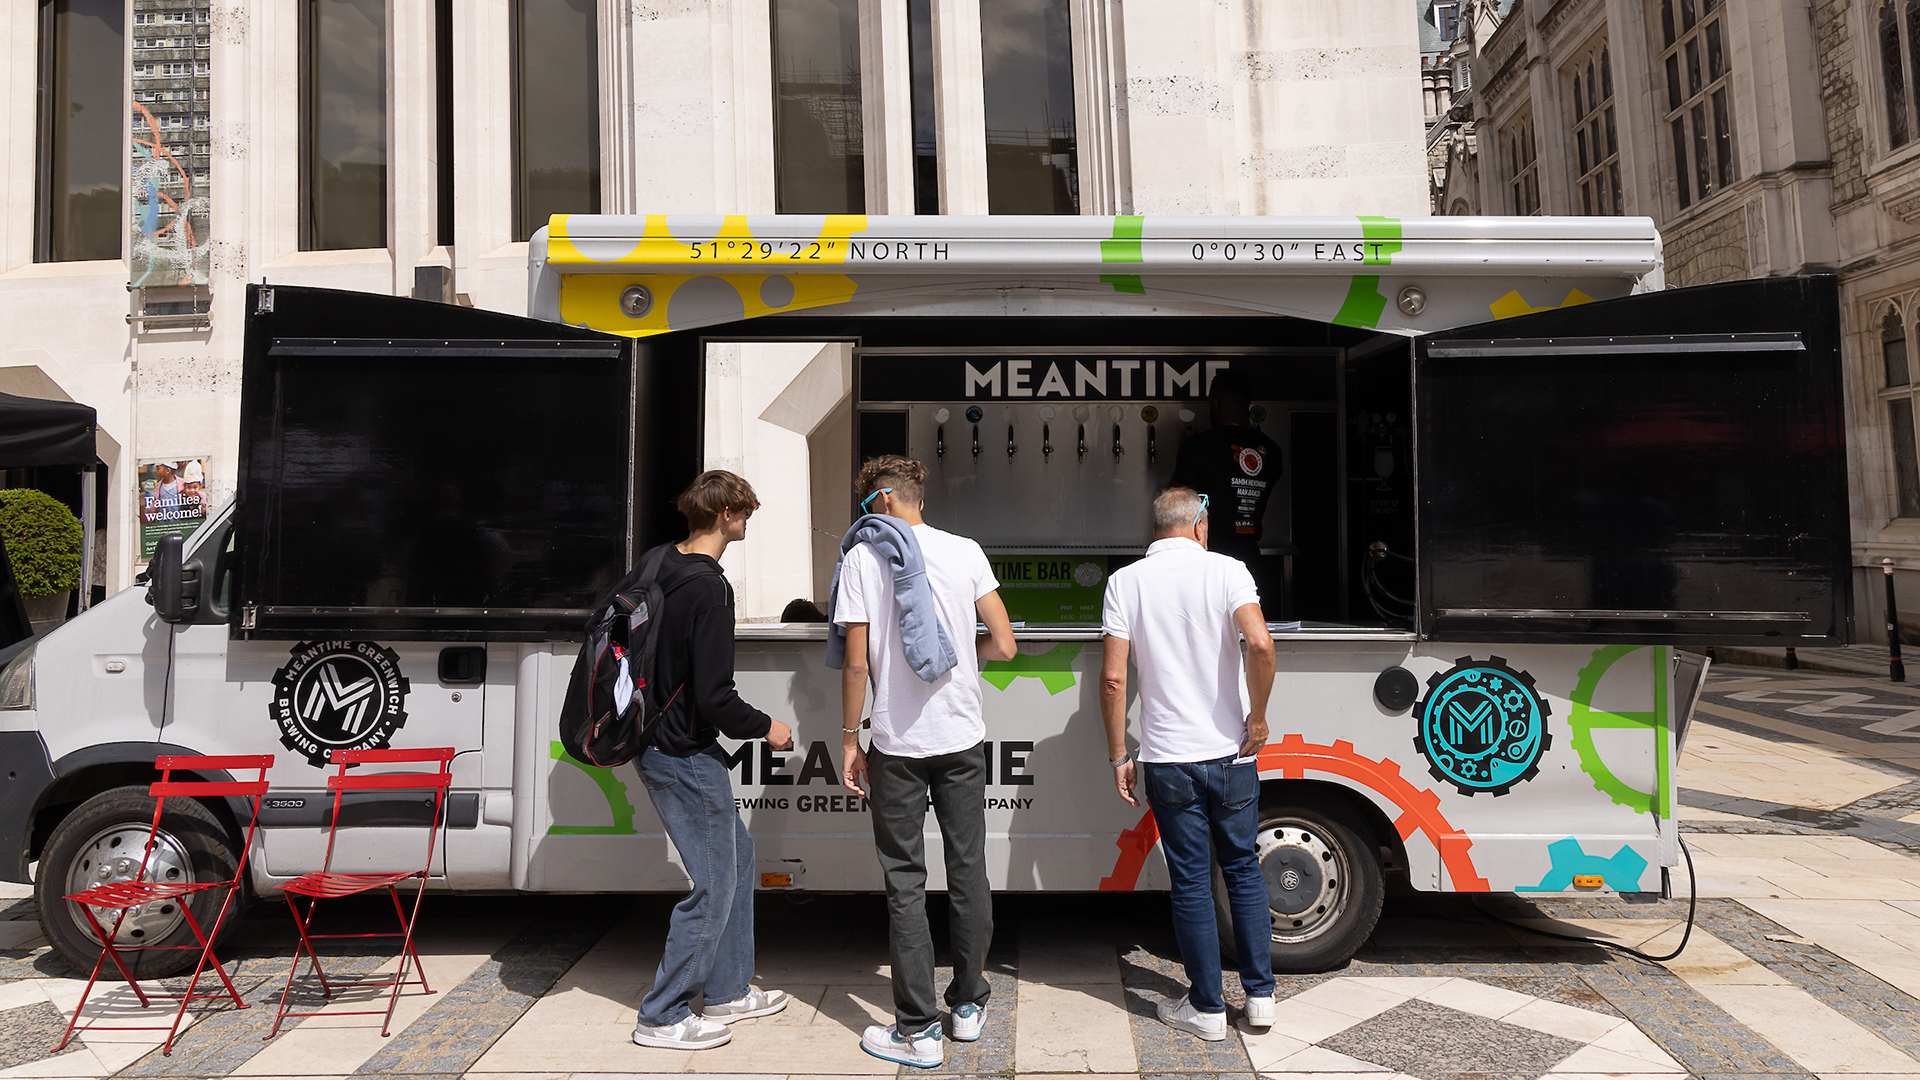 The Meantime Brewery Truck is white with a colourful wheels and cog design. The windows to the truck are open with the beer taps on display, a person pulling a pint, and three people waiting outside the truck.